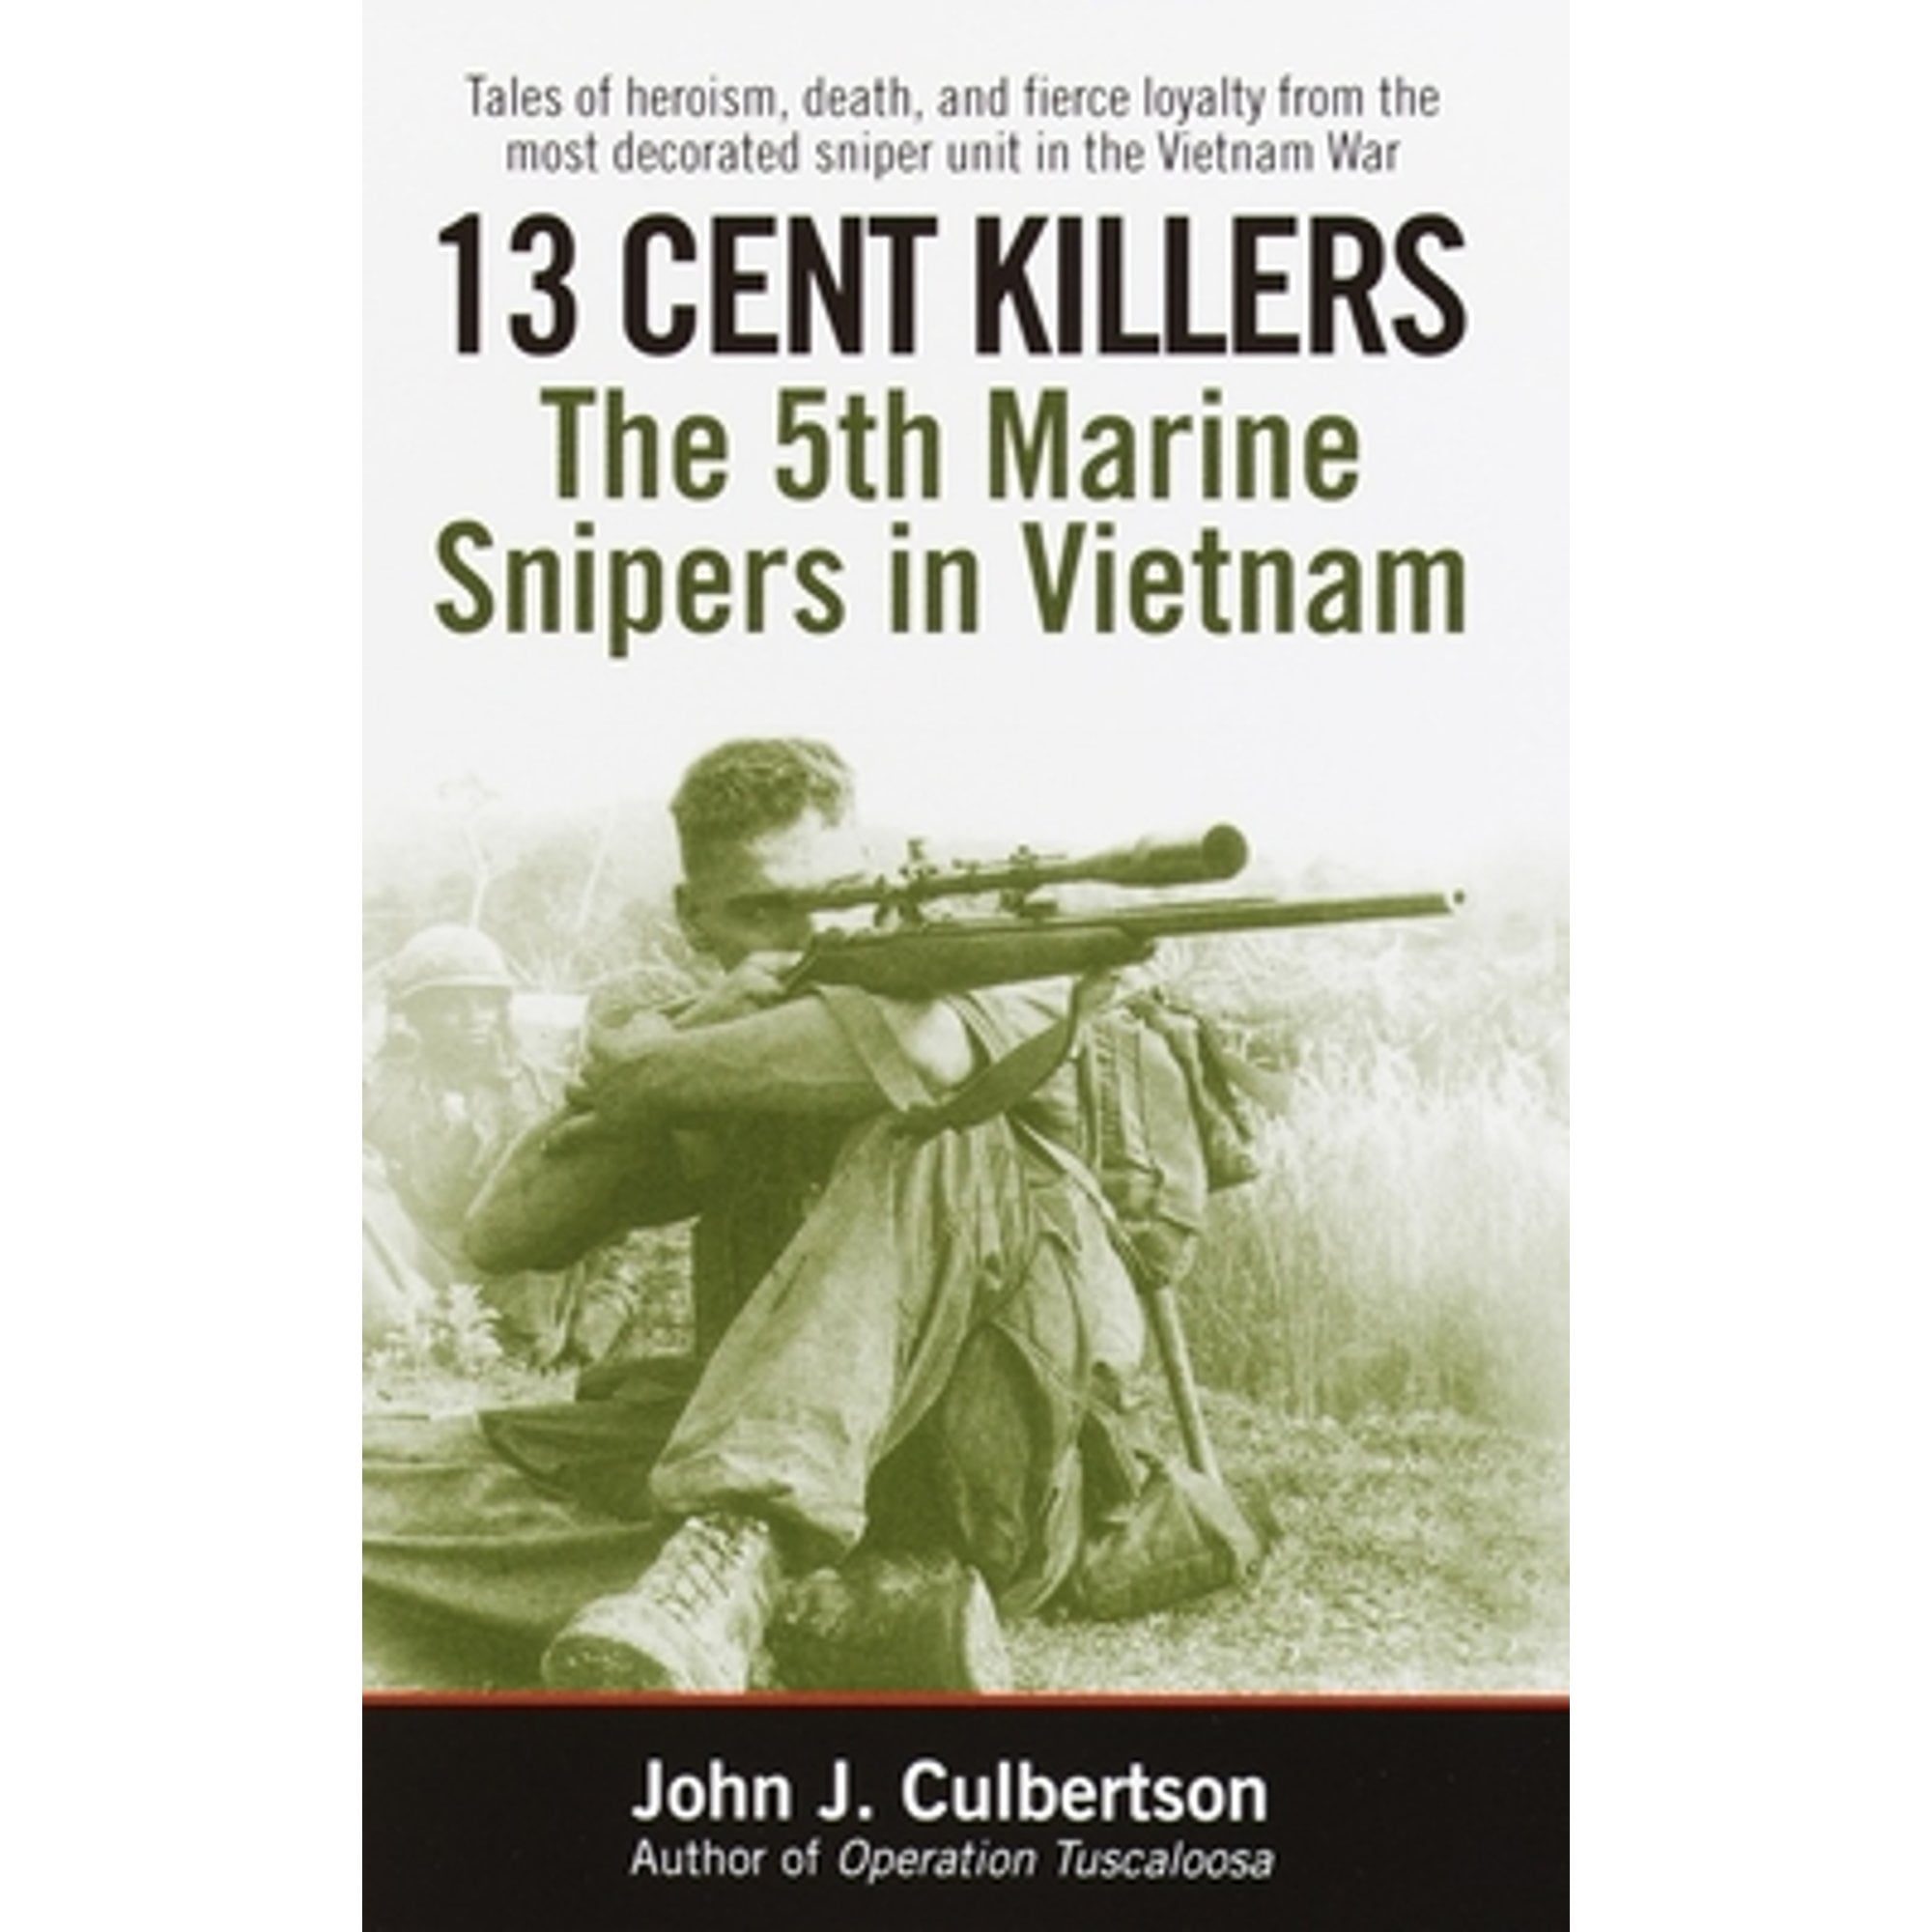 The 5th Marine Snipers In Vietnam